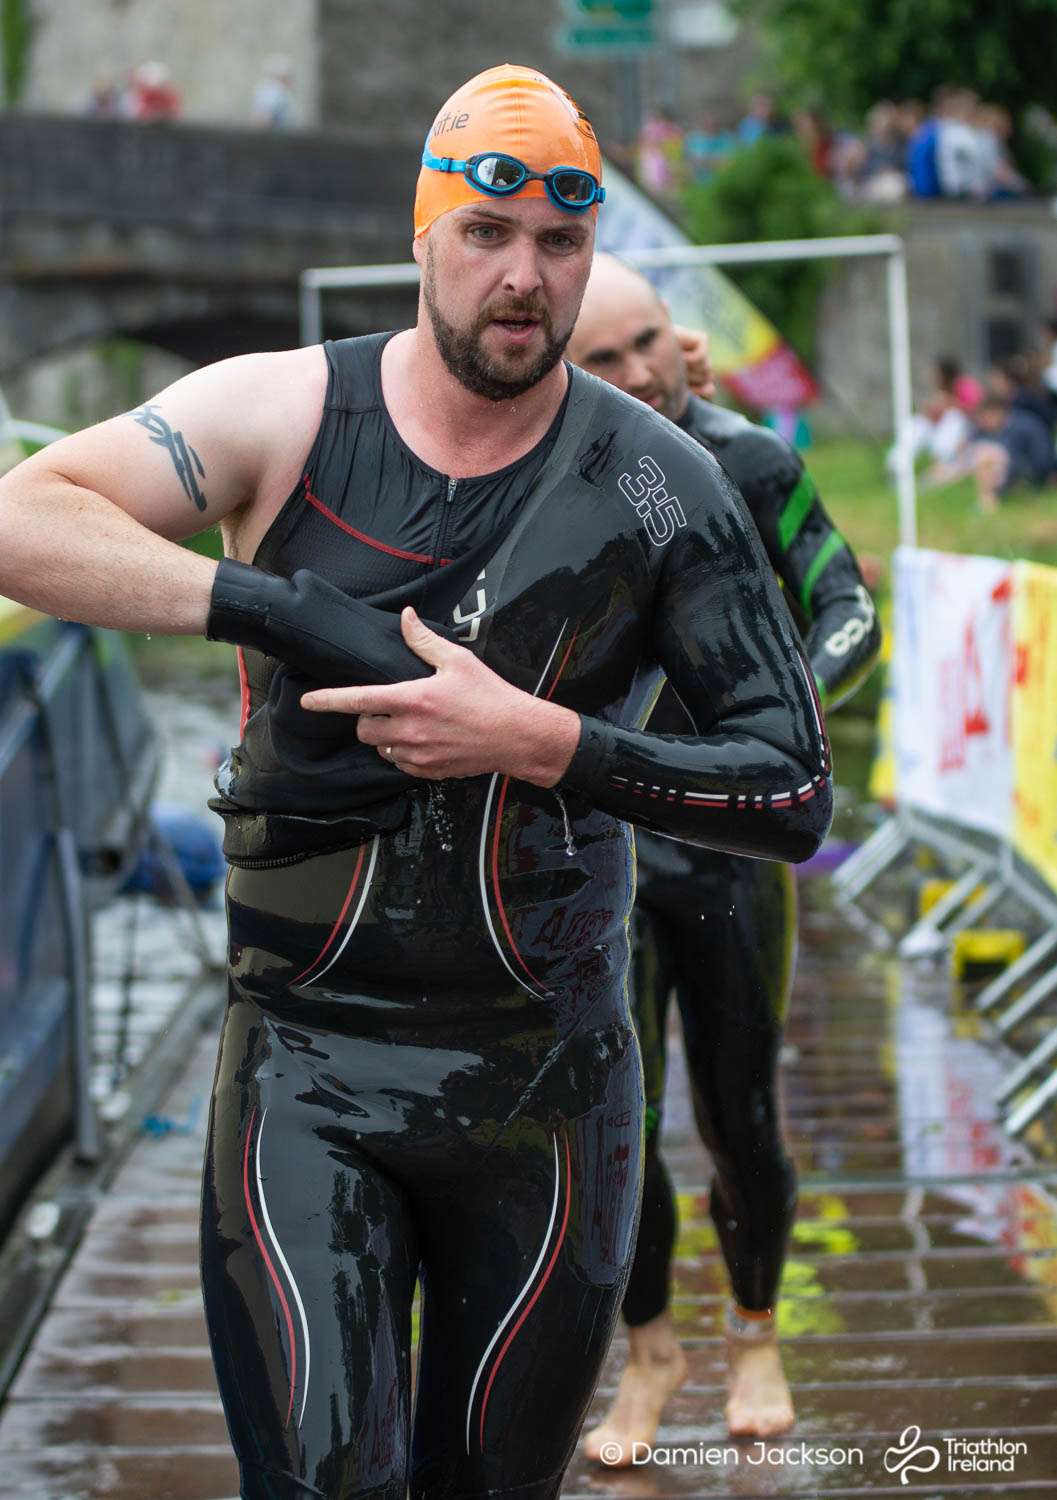 Athy_2018 (274 of 526) - TriAthy - XII Edition - 2nd June 2018